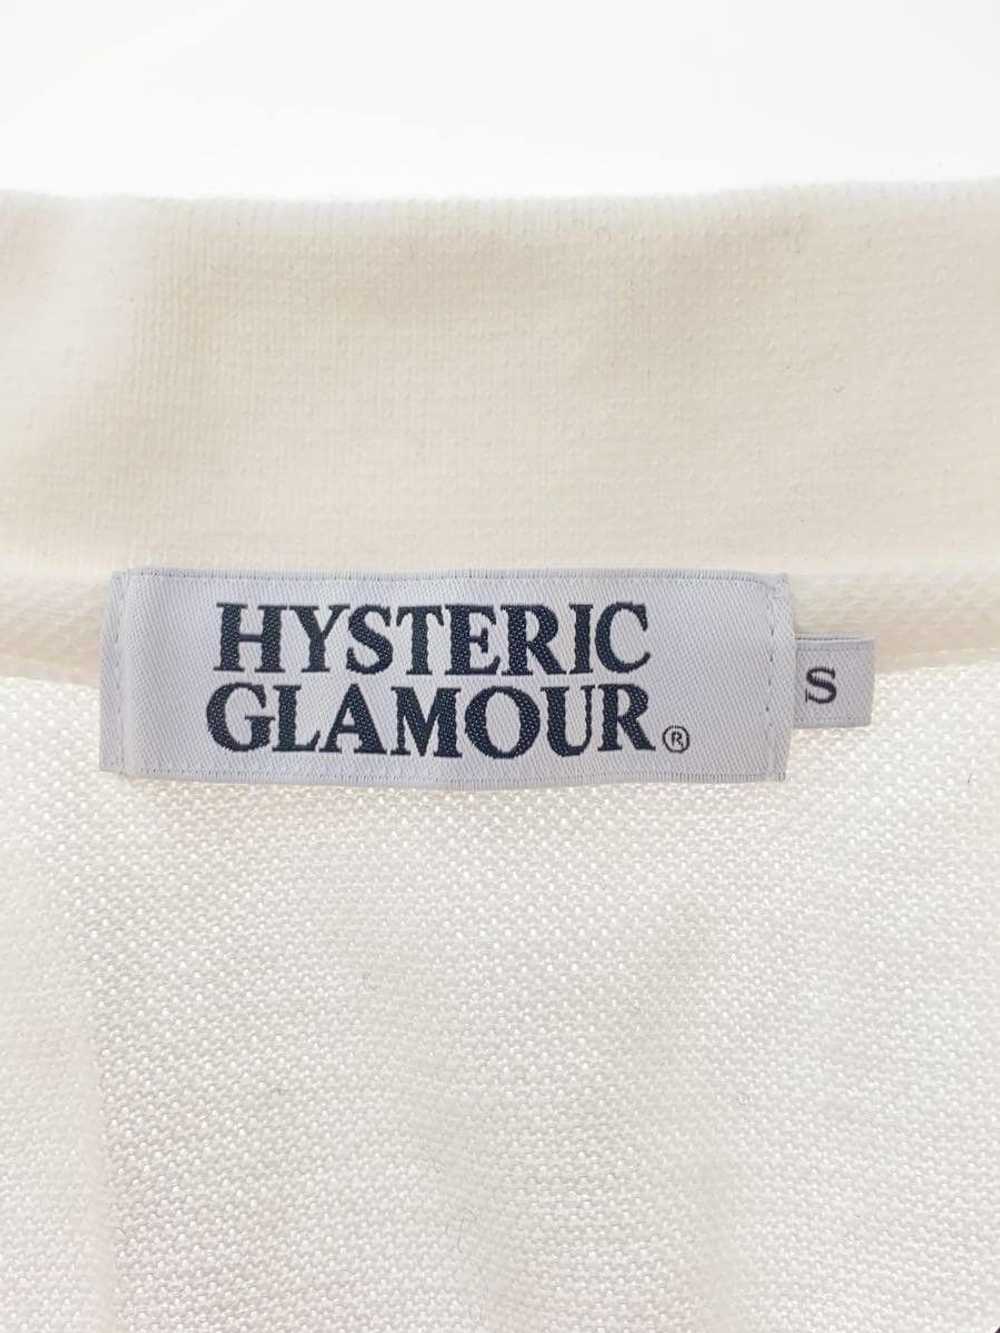 Hysteric Glamour 🐎 Girl Polo - image 3